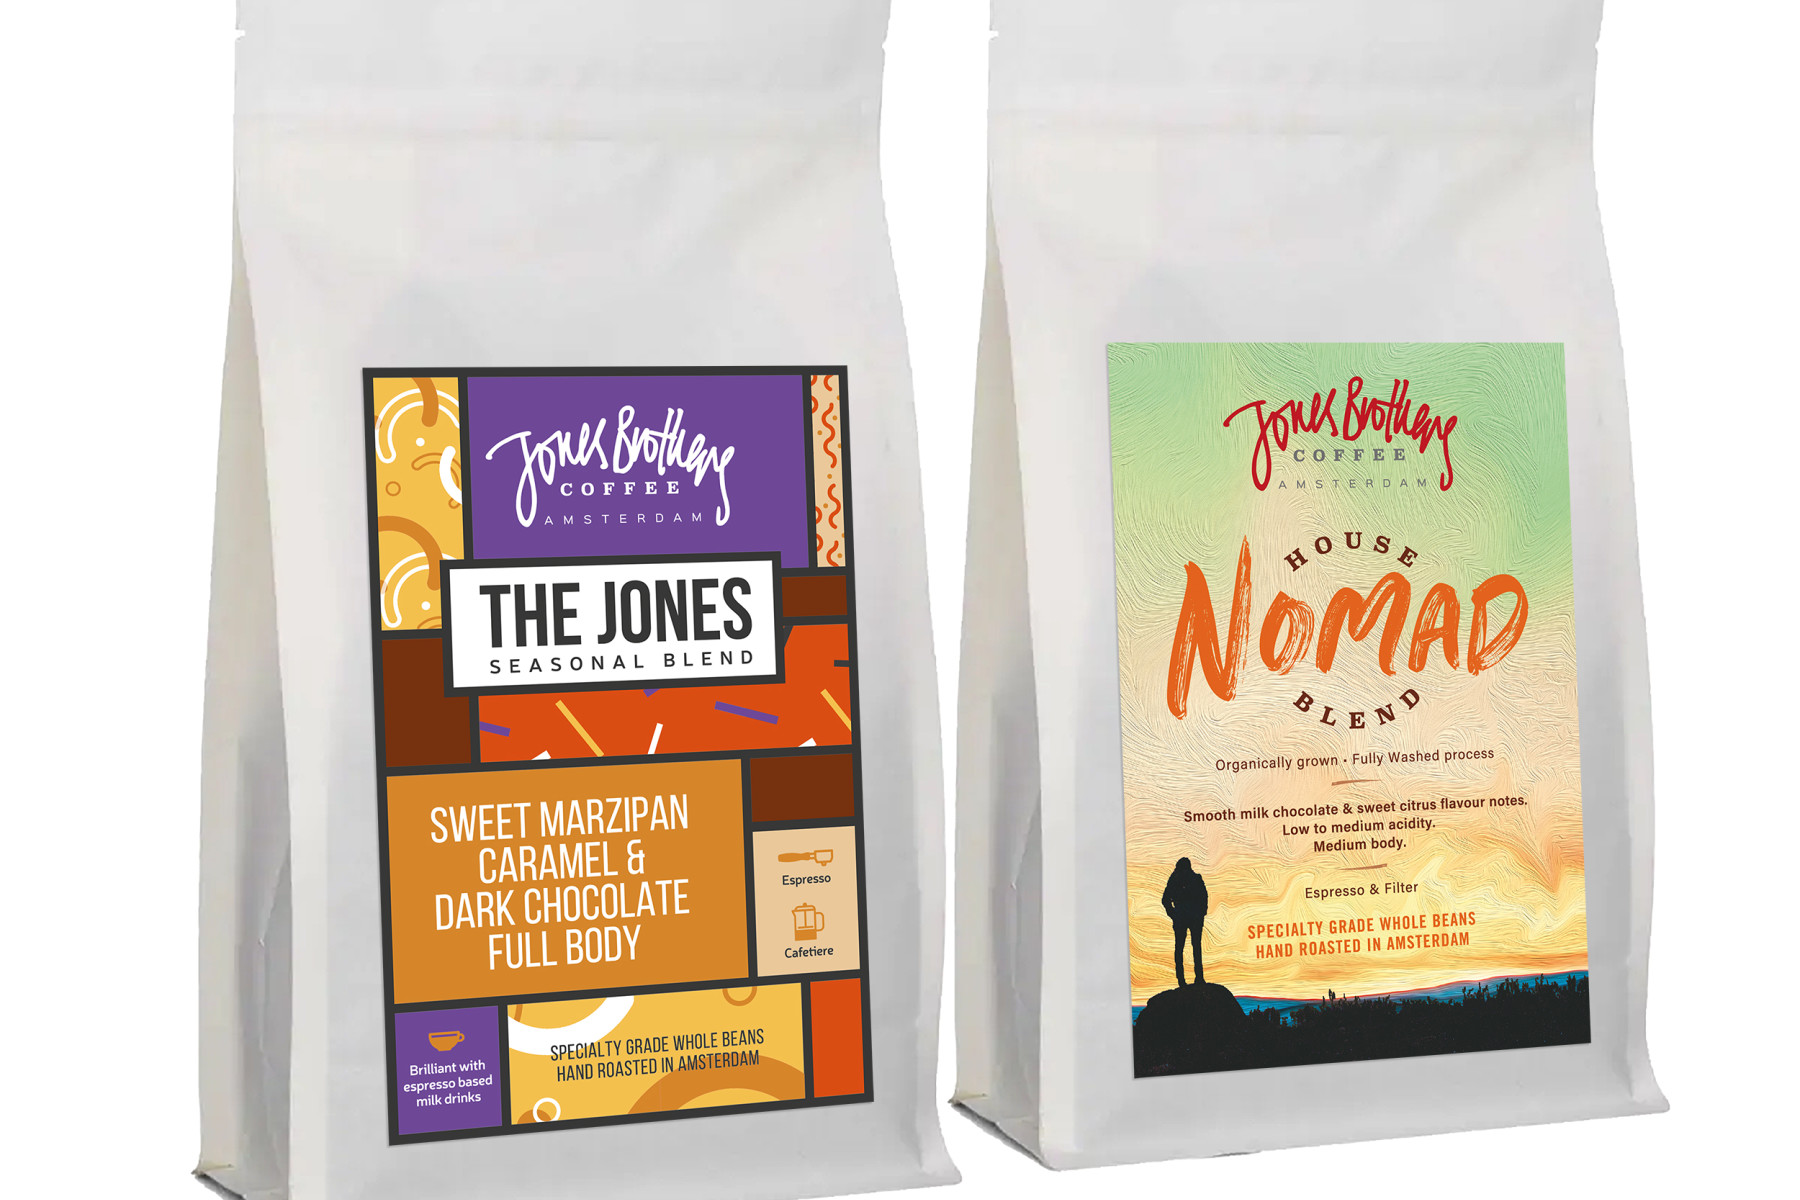 Offre duo  - The Jones & Nomad Blends